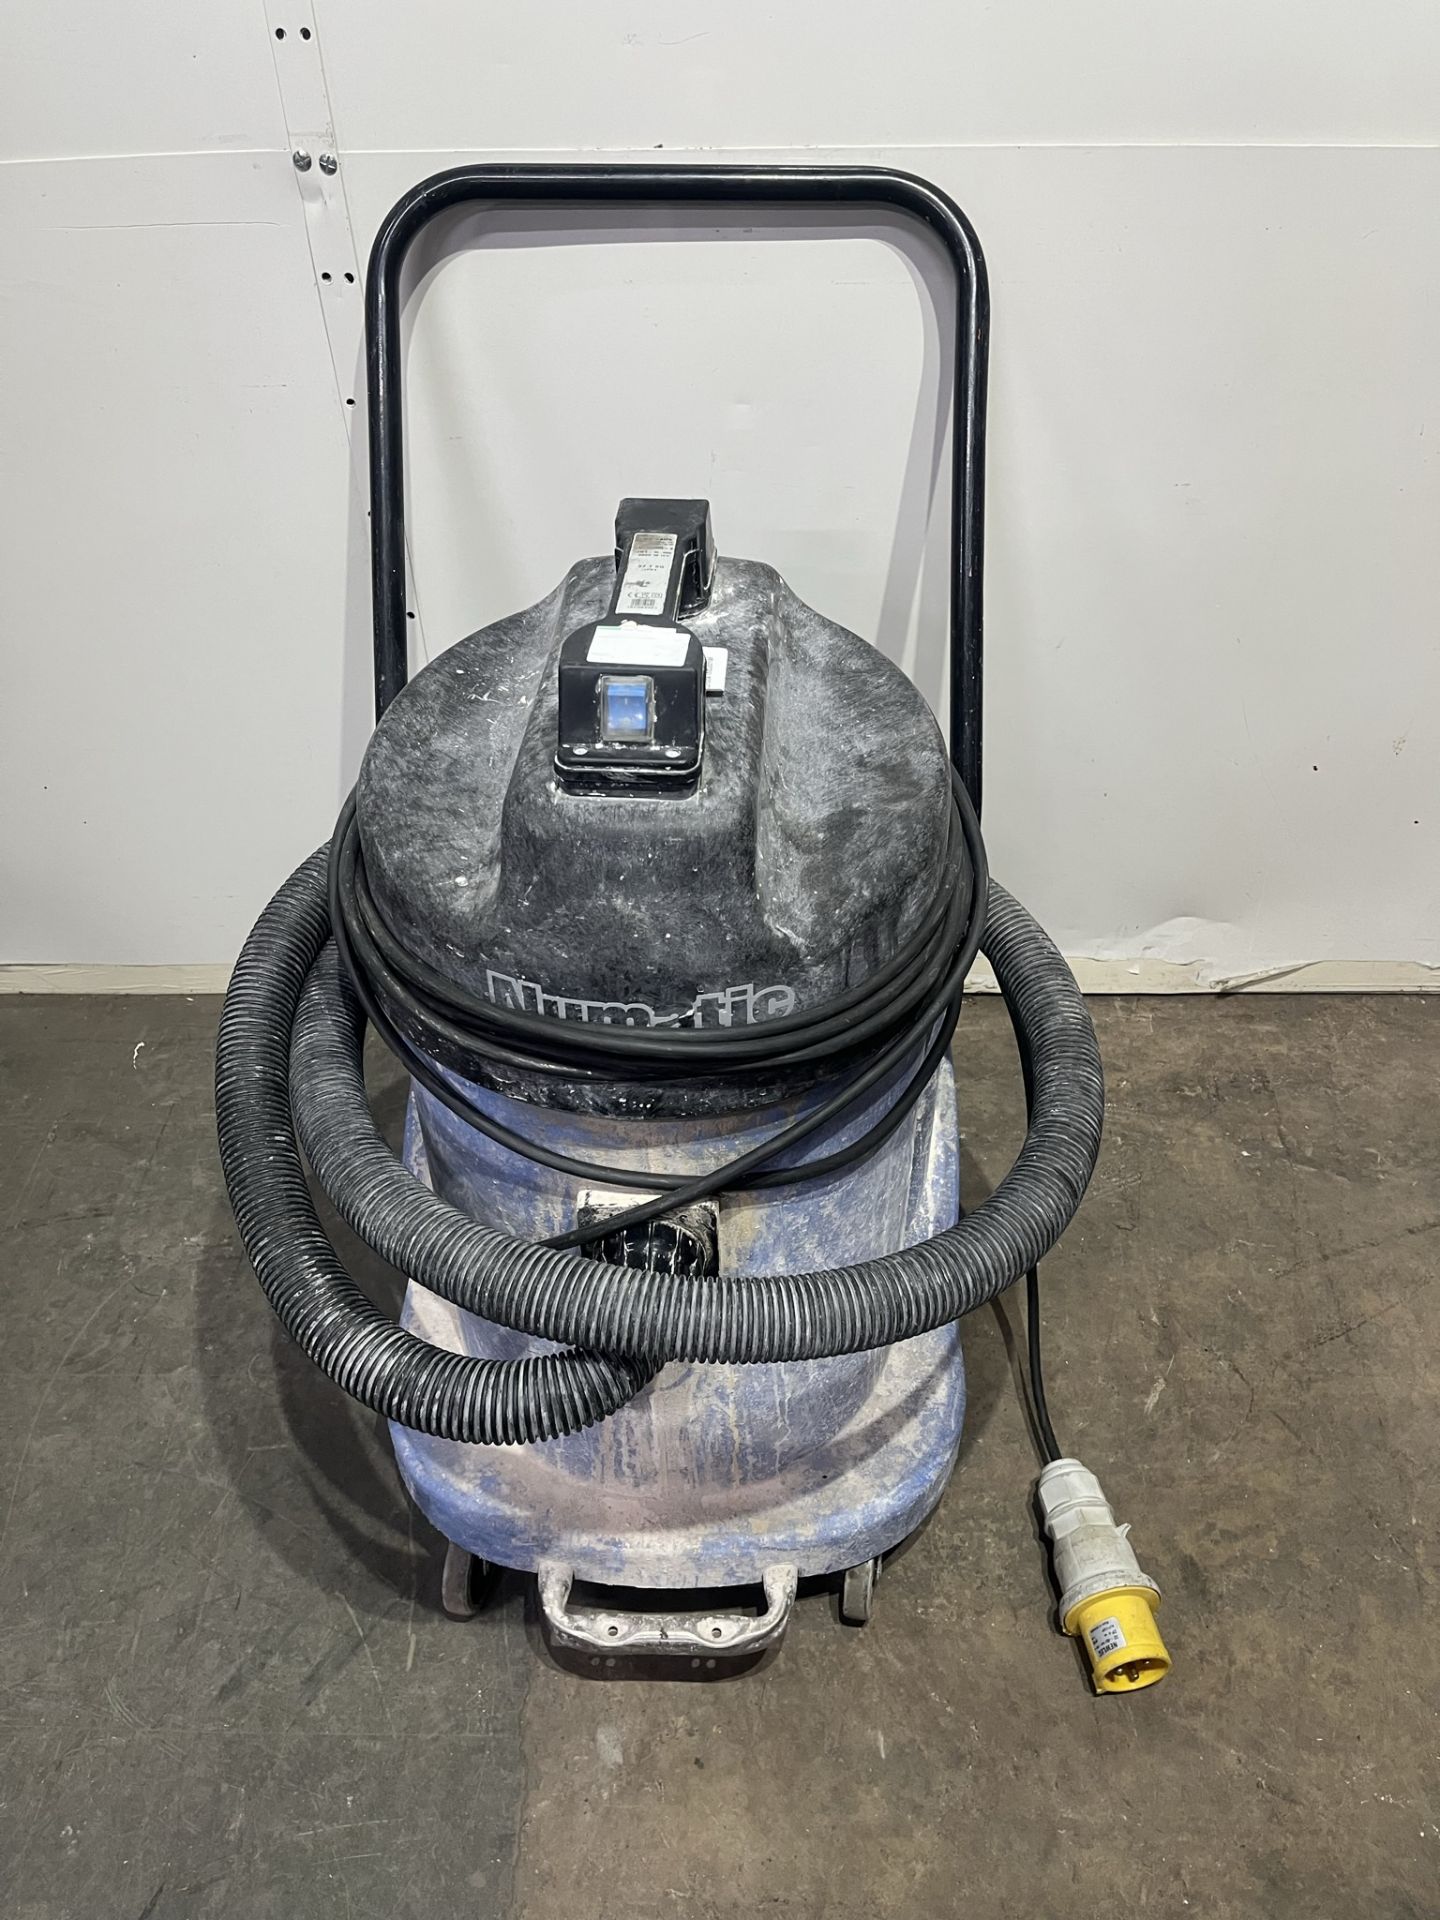 Numatic IPX4 Commercial Wet & Dry Vacuum Cleaner